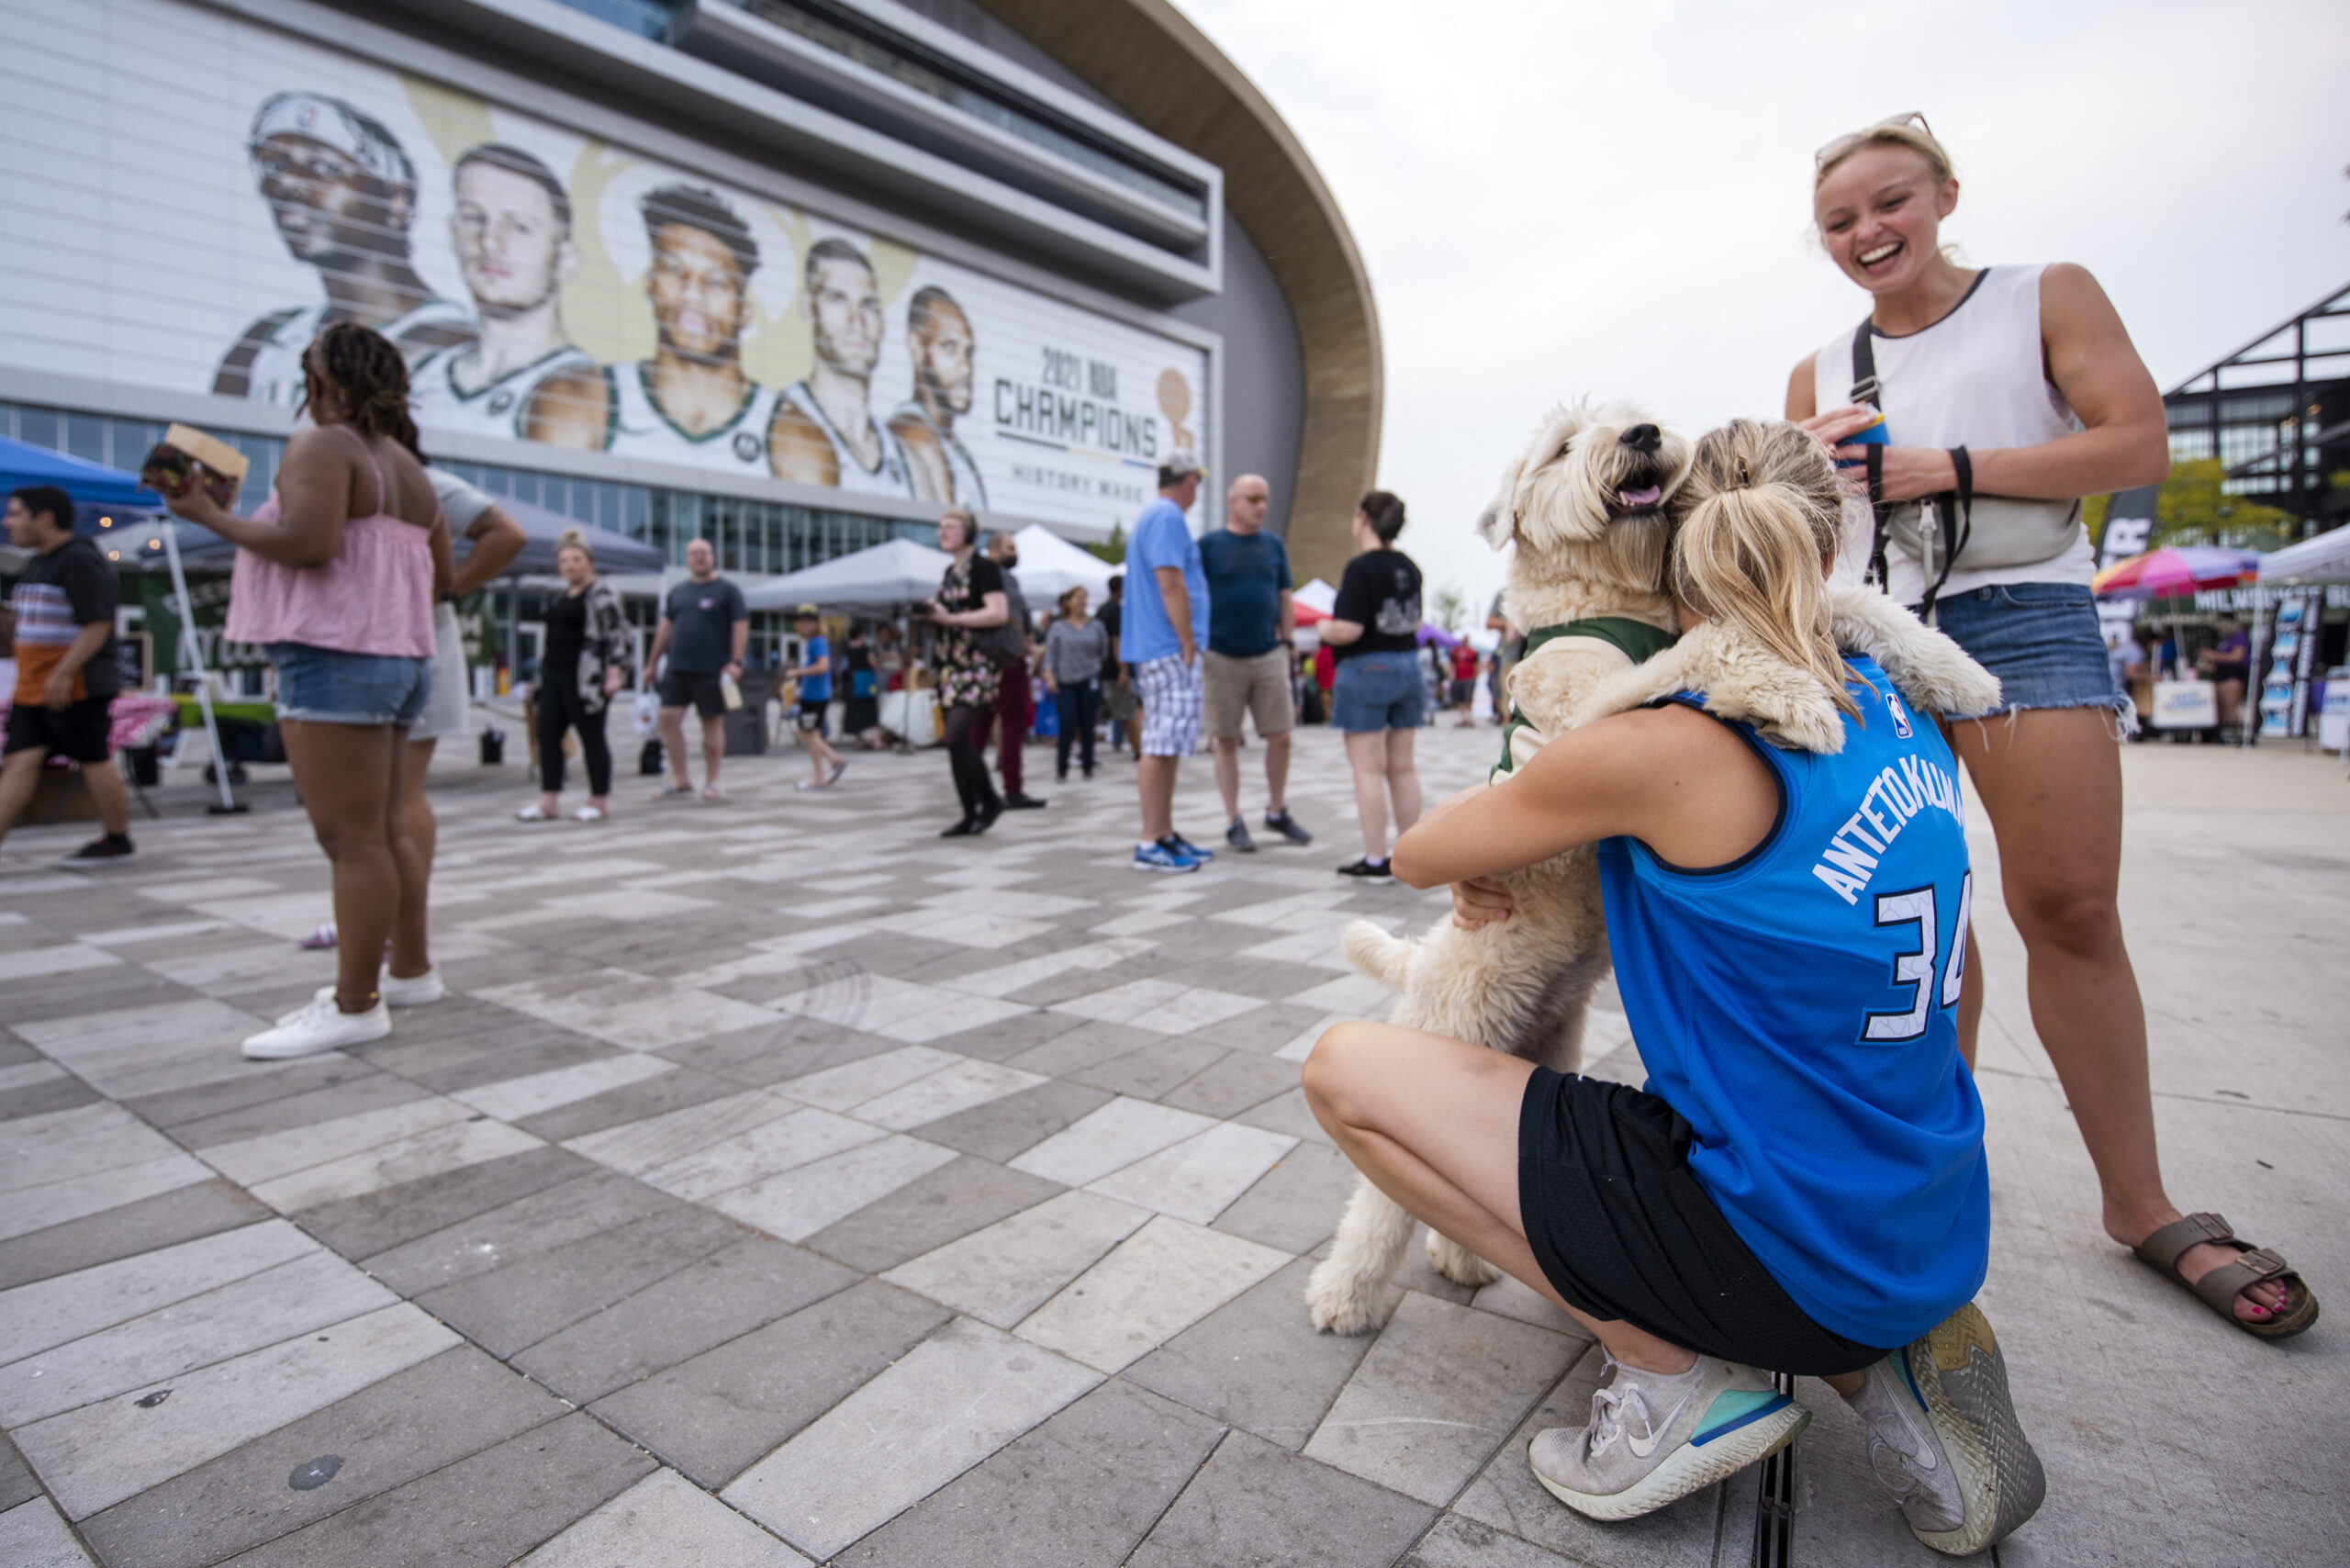 A woman wears a blue Bucks jersey as she hugs her dog with light fur in front of the Fiserv Forum.